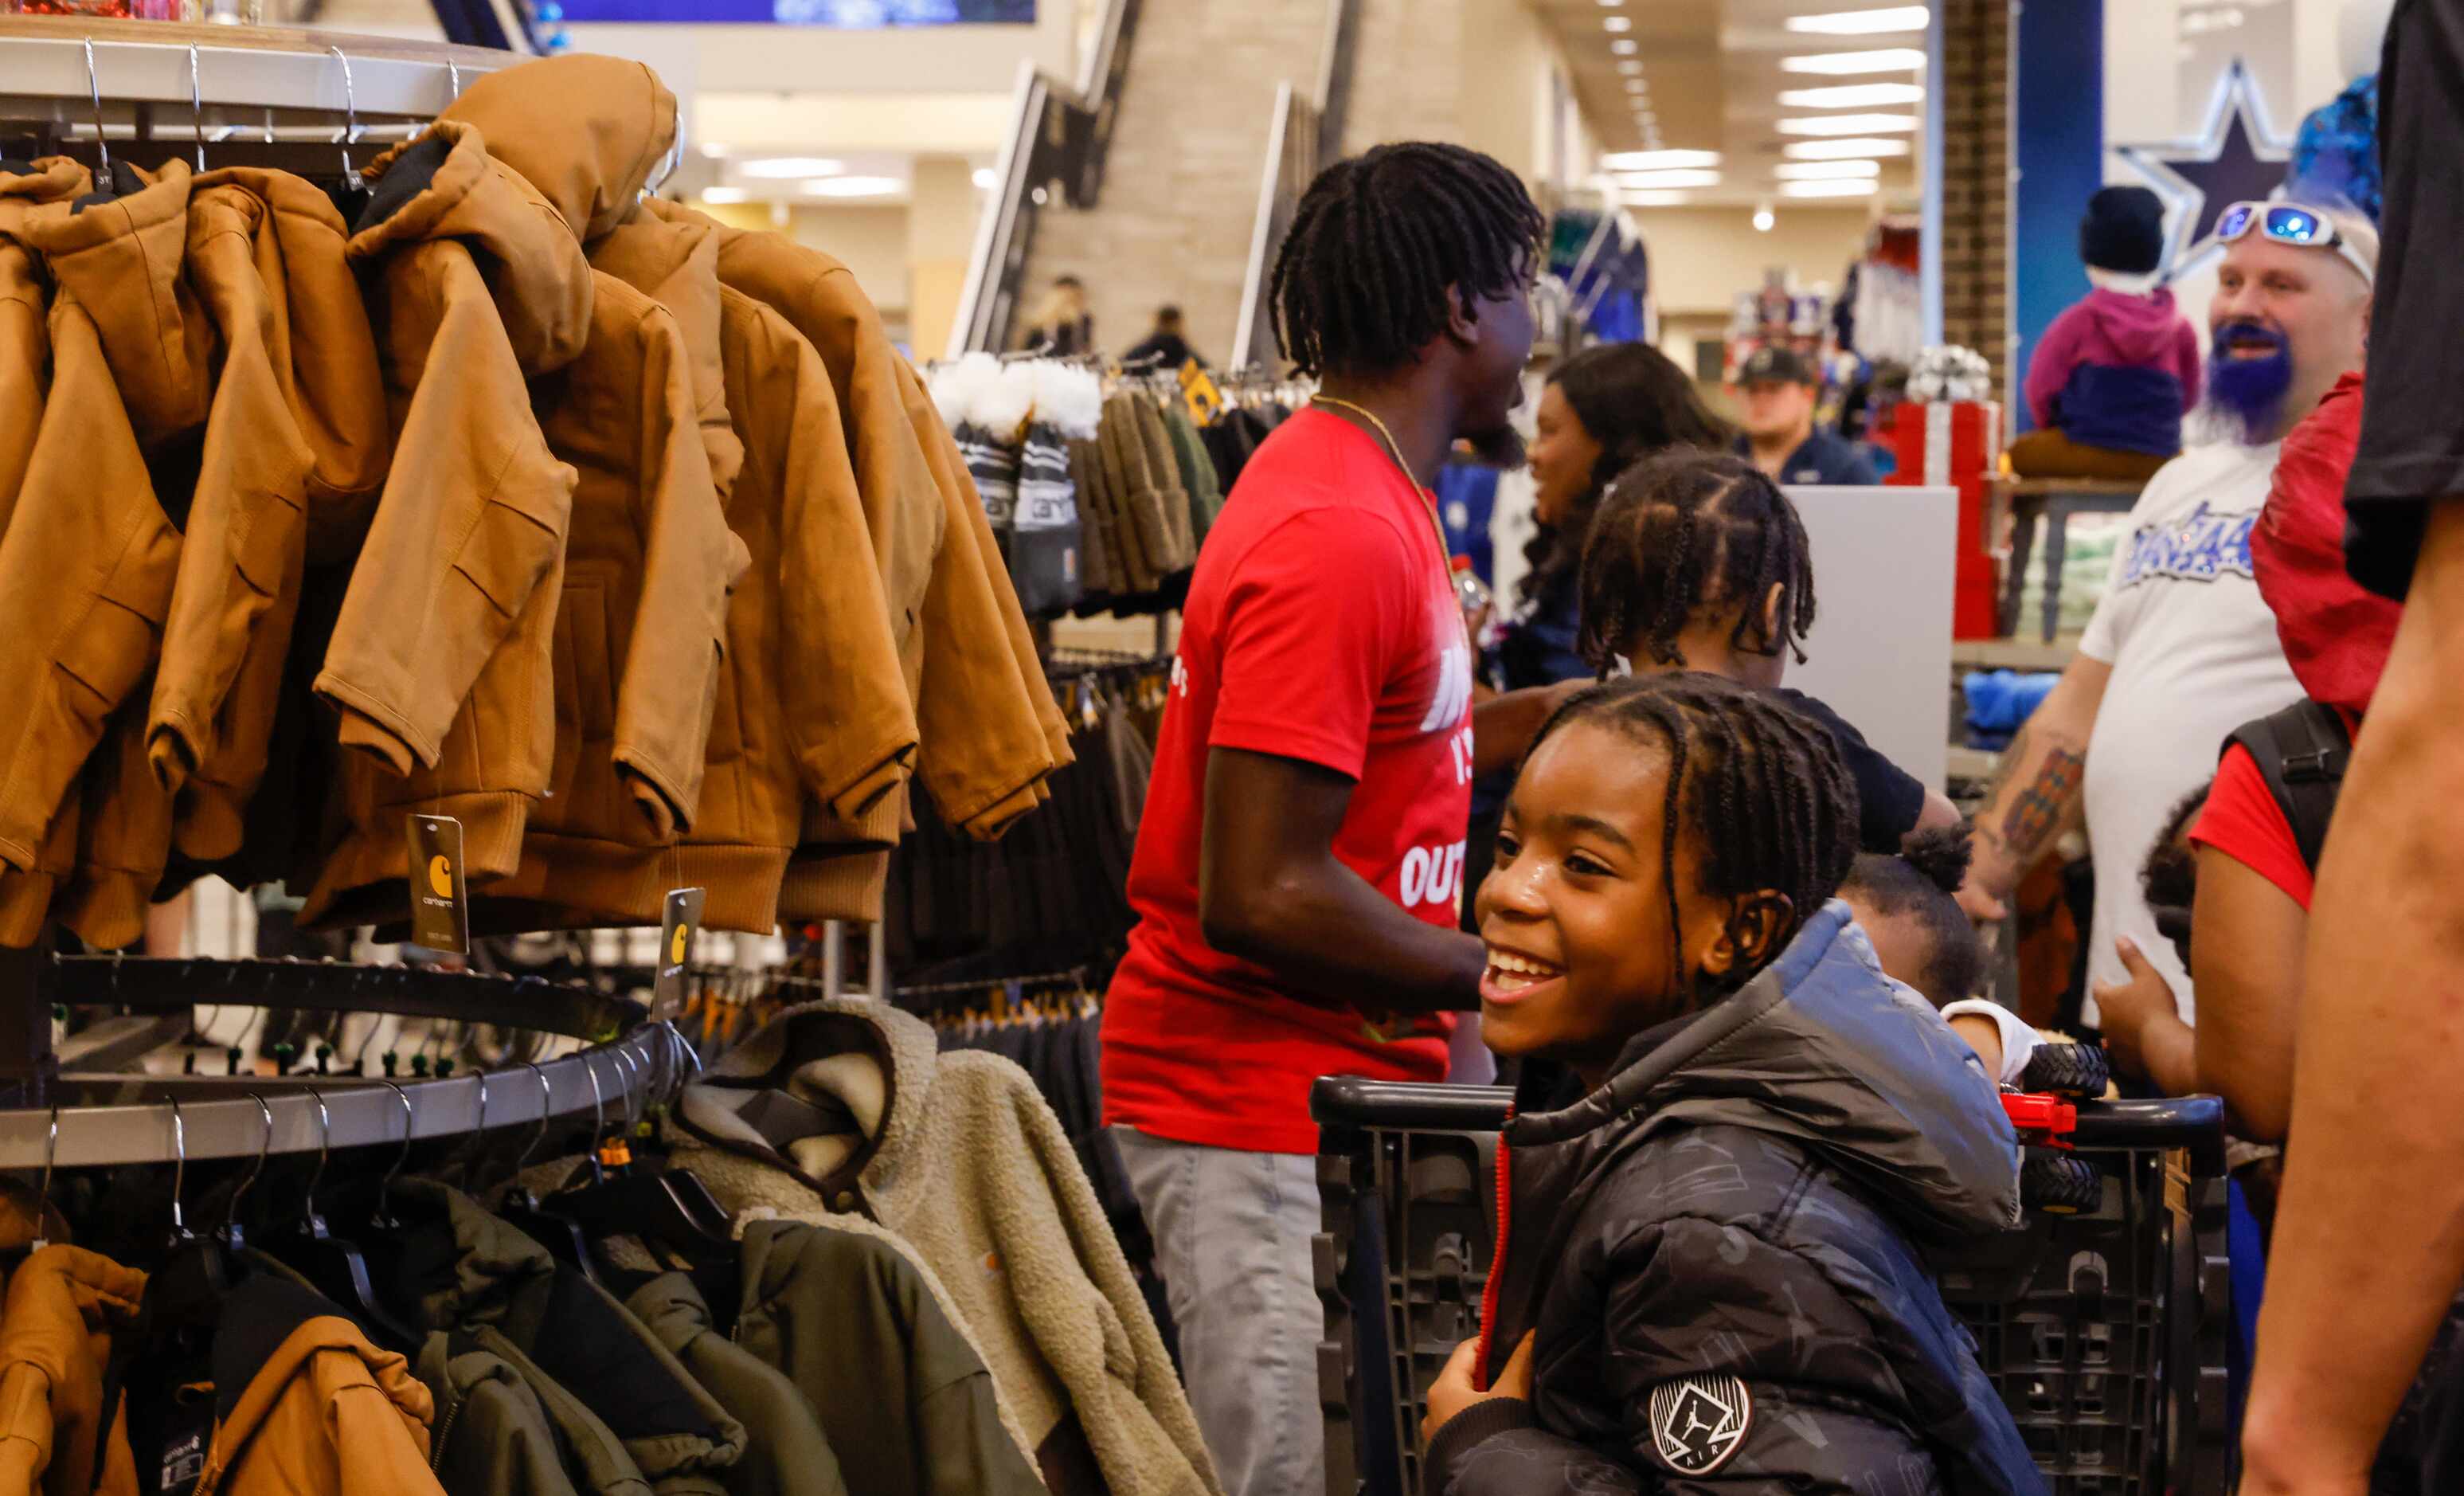 Derrick Givens, Jr., 9, smiles while pulling on a new Jordan jacket while shopping with...